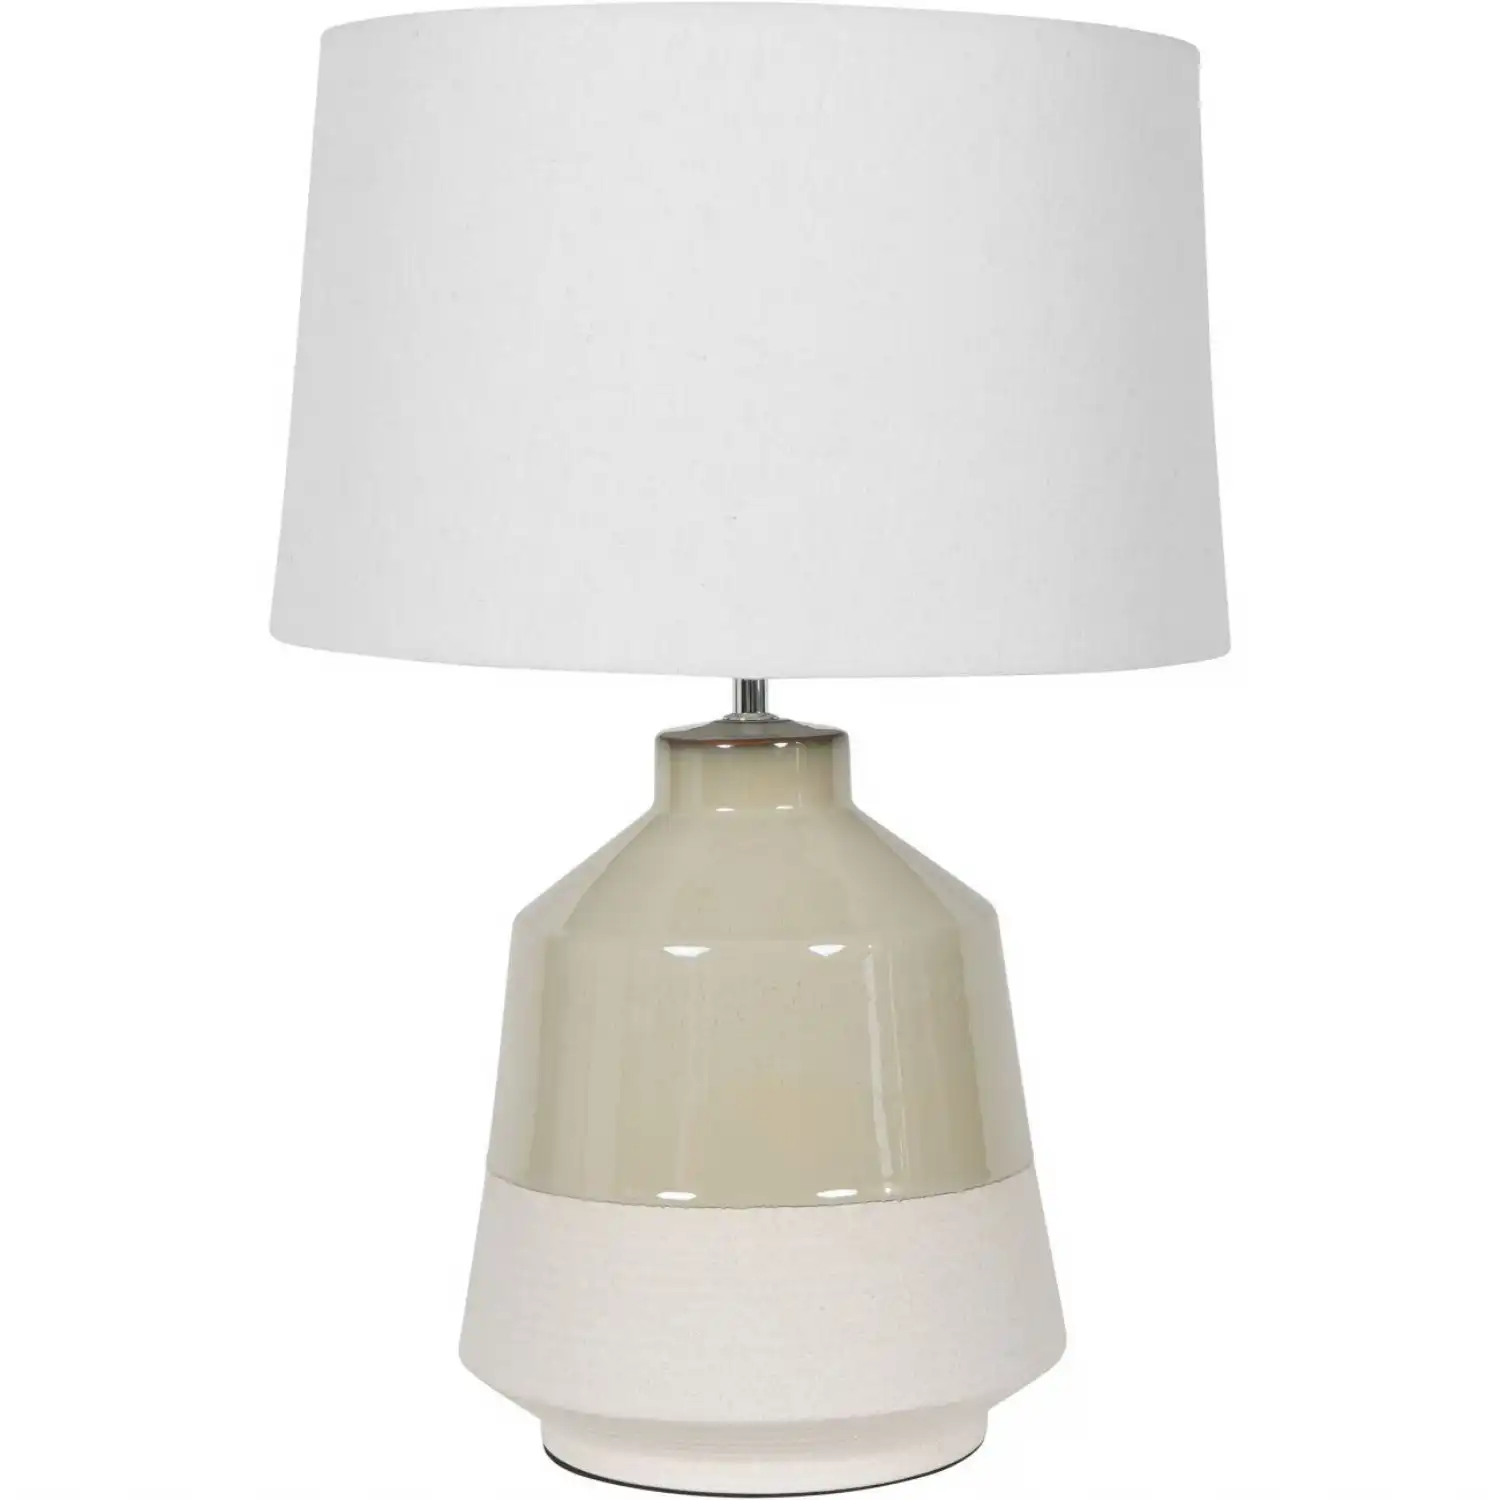 Green Dipped Glaze Table Lamp 58cm with Ivory Shade